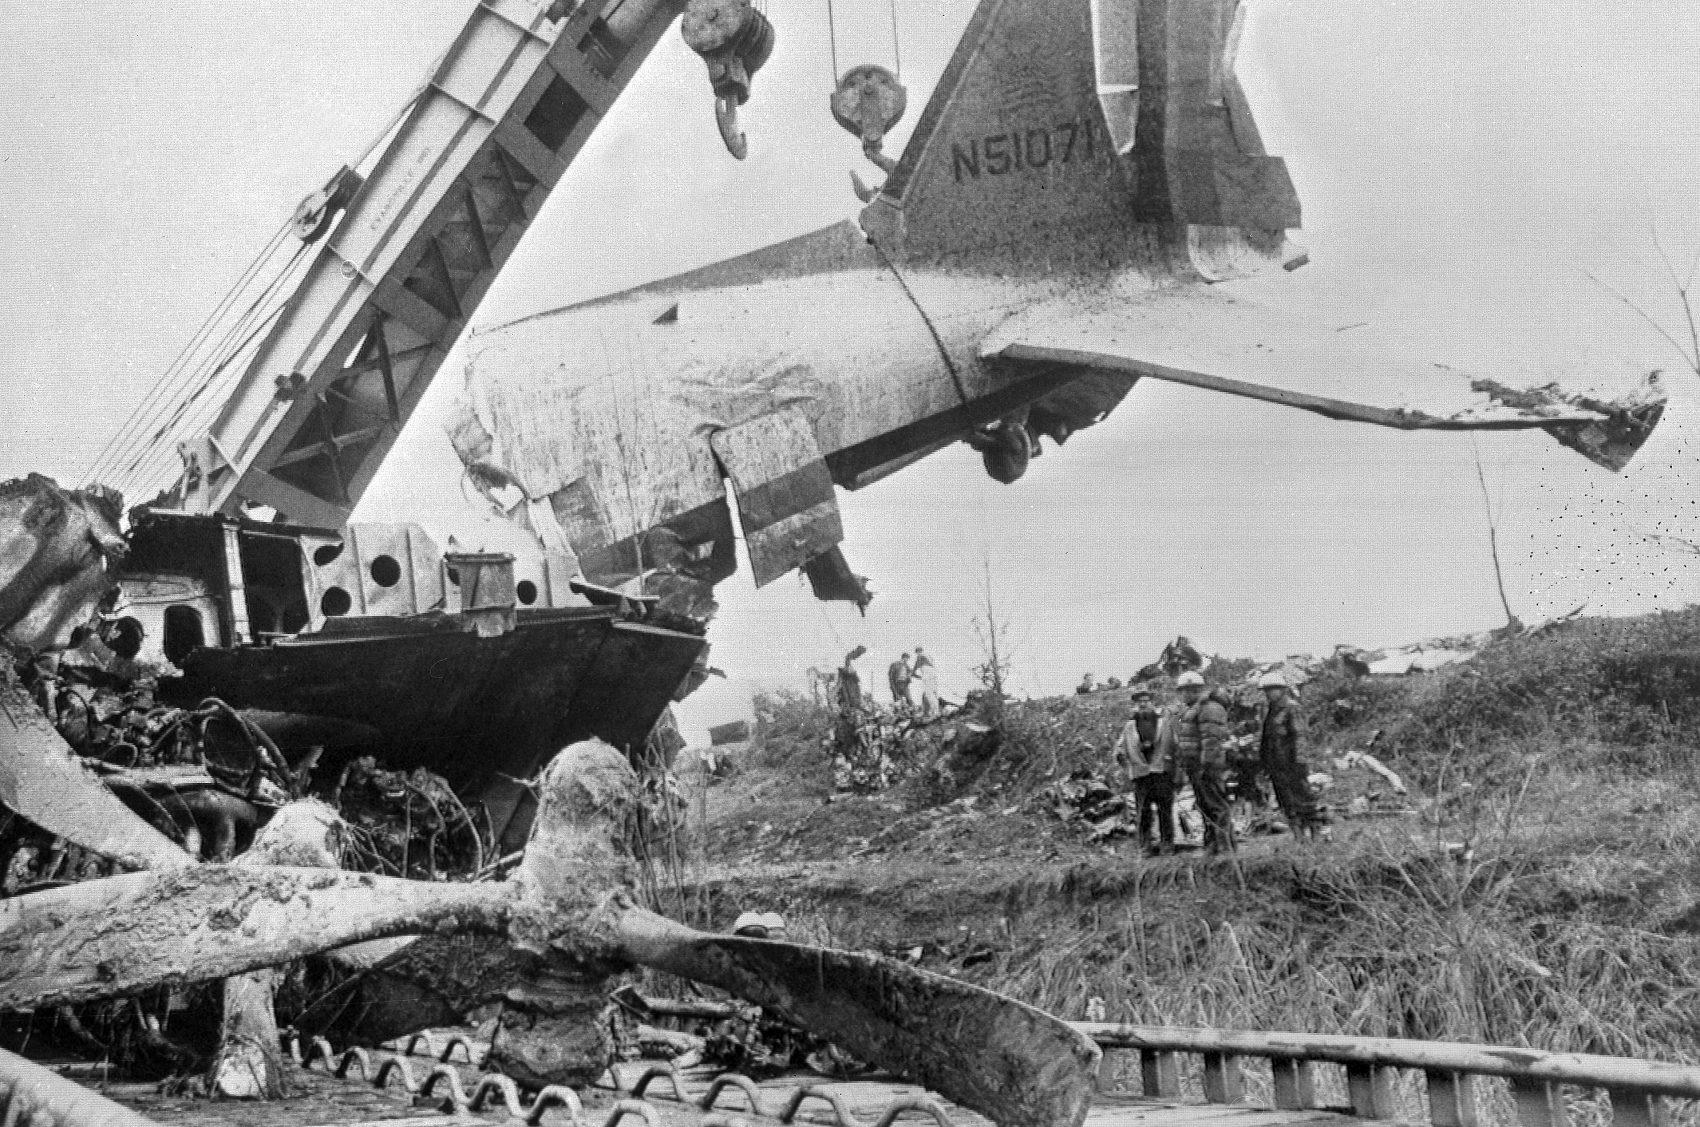 40 Years Ago, A Deadly Plane Crash 'Tore At The Fabric' Of One Indiana